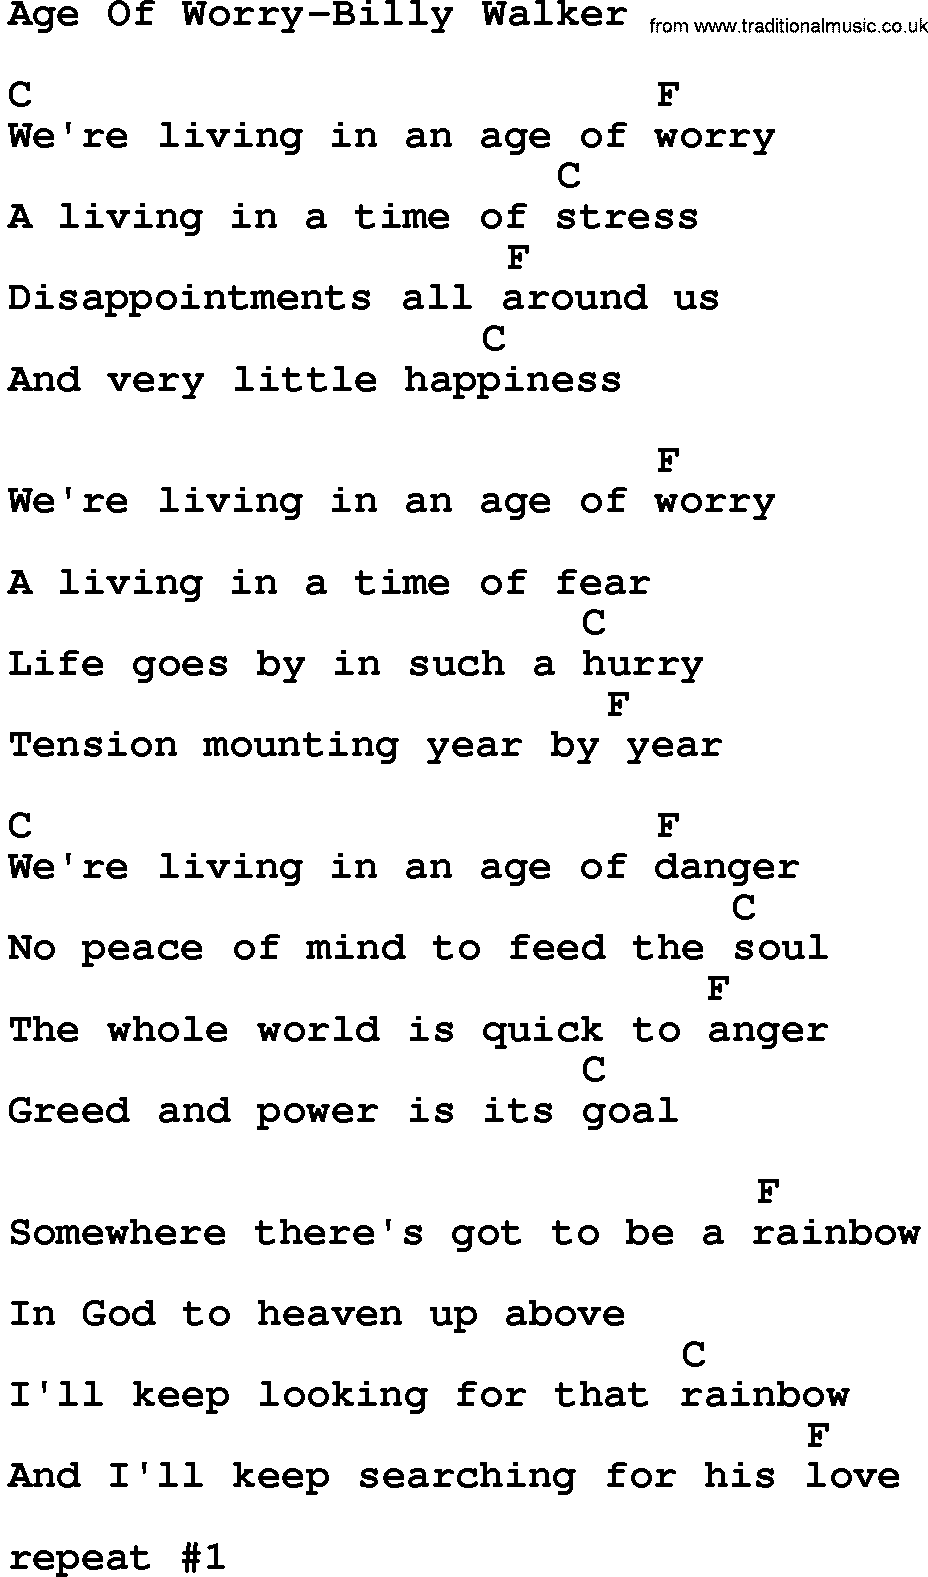 Country music song: Age Of Worry-Billy Walker lyrics and chords